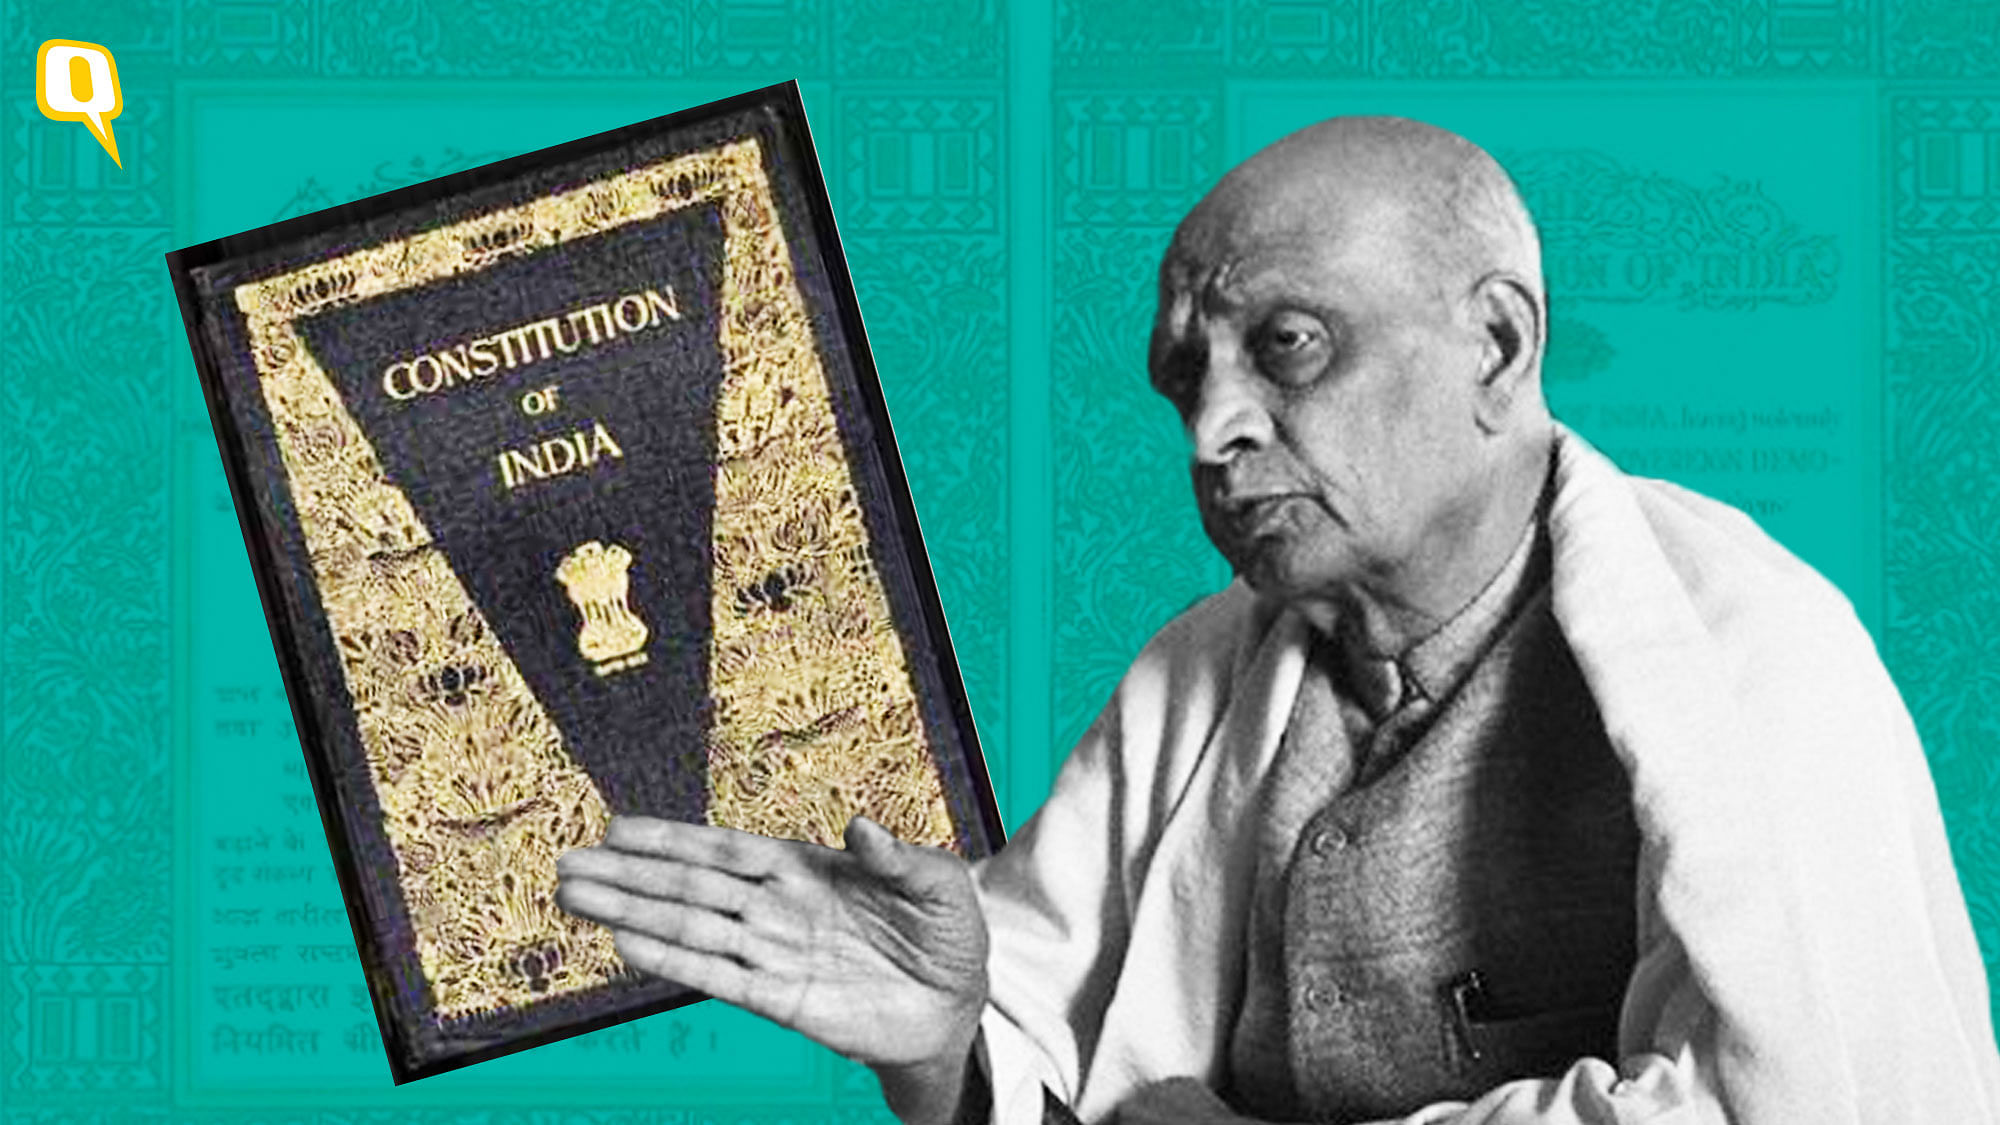 Image of Sardar Patel and the Indian Constitution used for representational purposes.